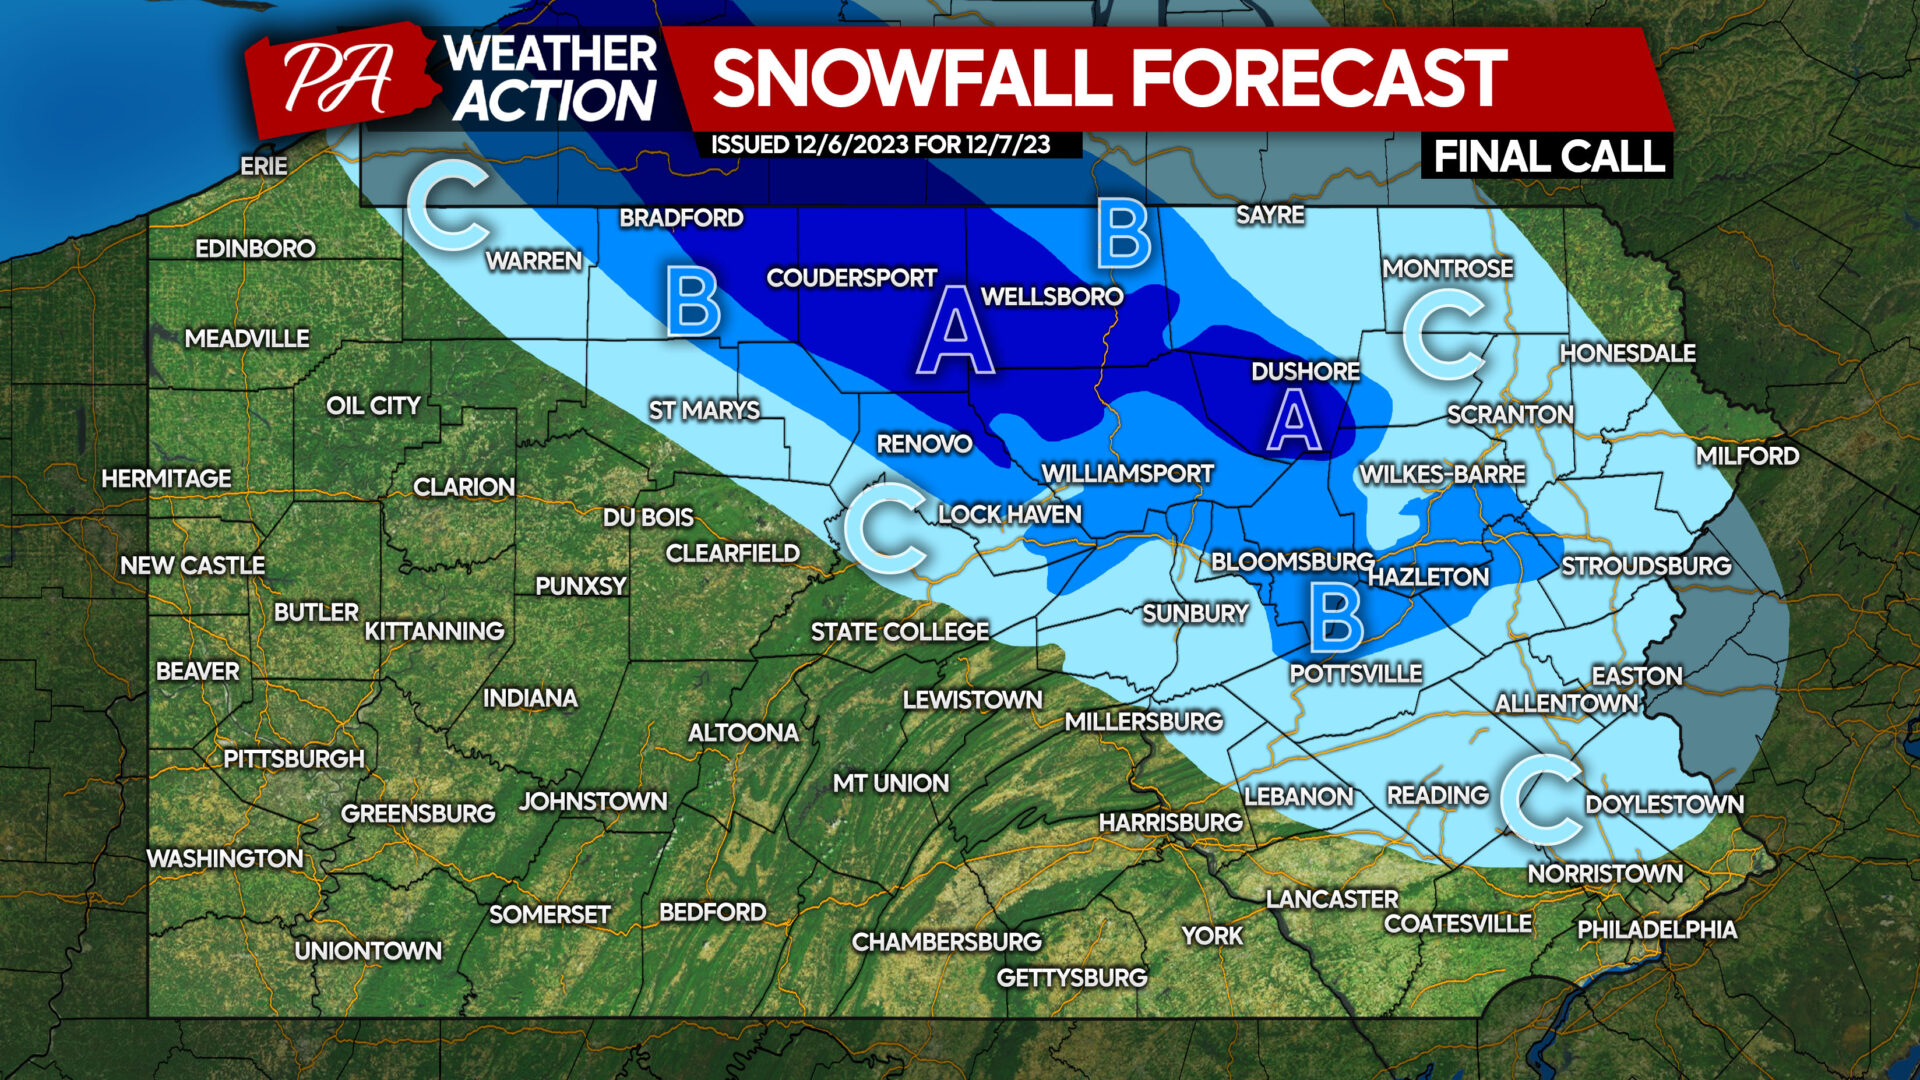 Burst of Snow Thursday to Cause Travel Disruptions Across Parts of PA; Final Call Snowfall Forecast